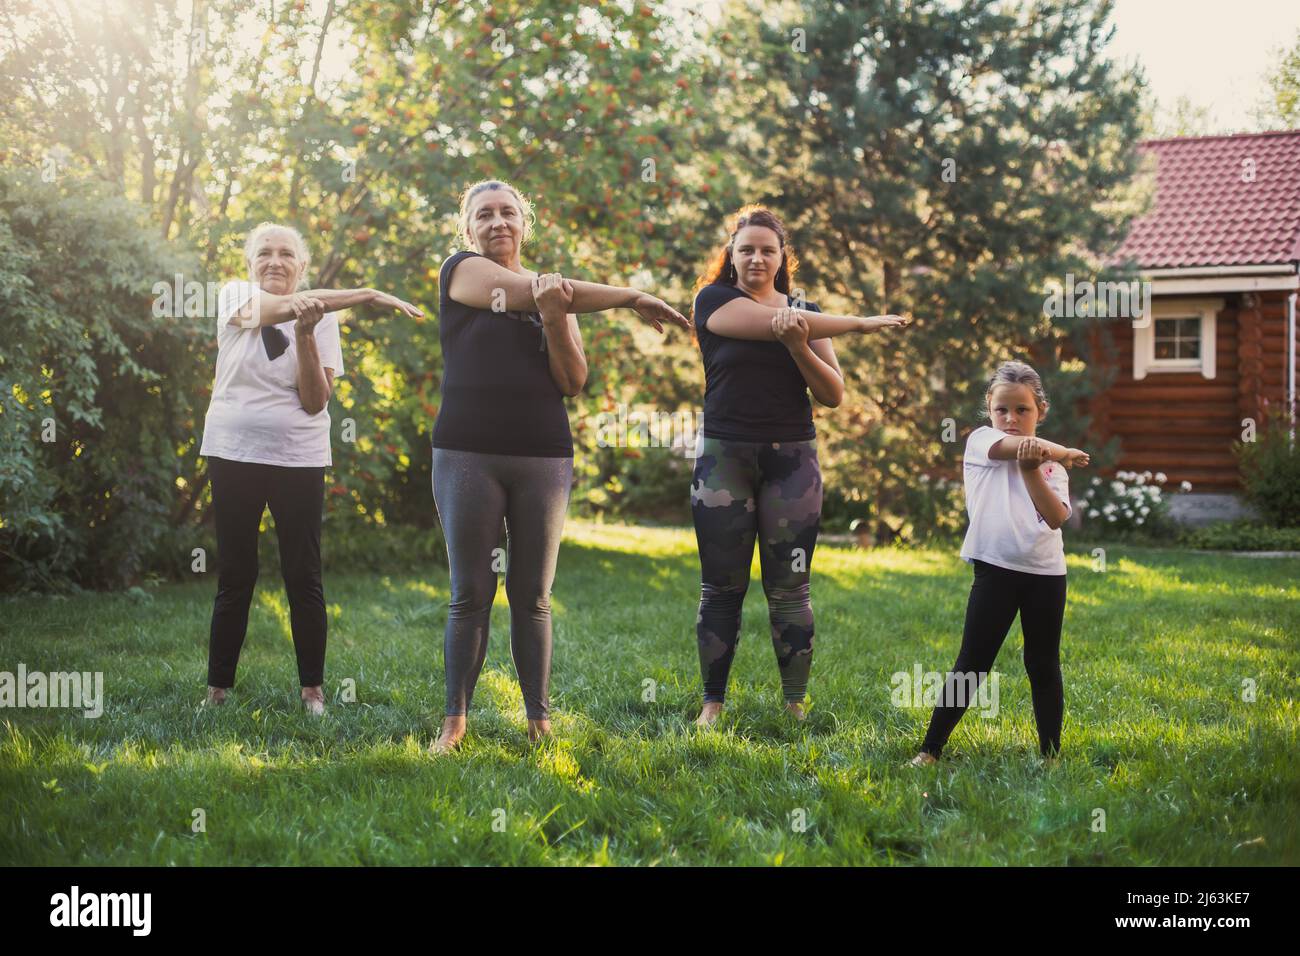 Females of few generations exercising outside stretching arms together in same way standing on meadow full of green grass and trees. Spending time Stock Photo